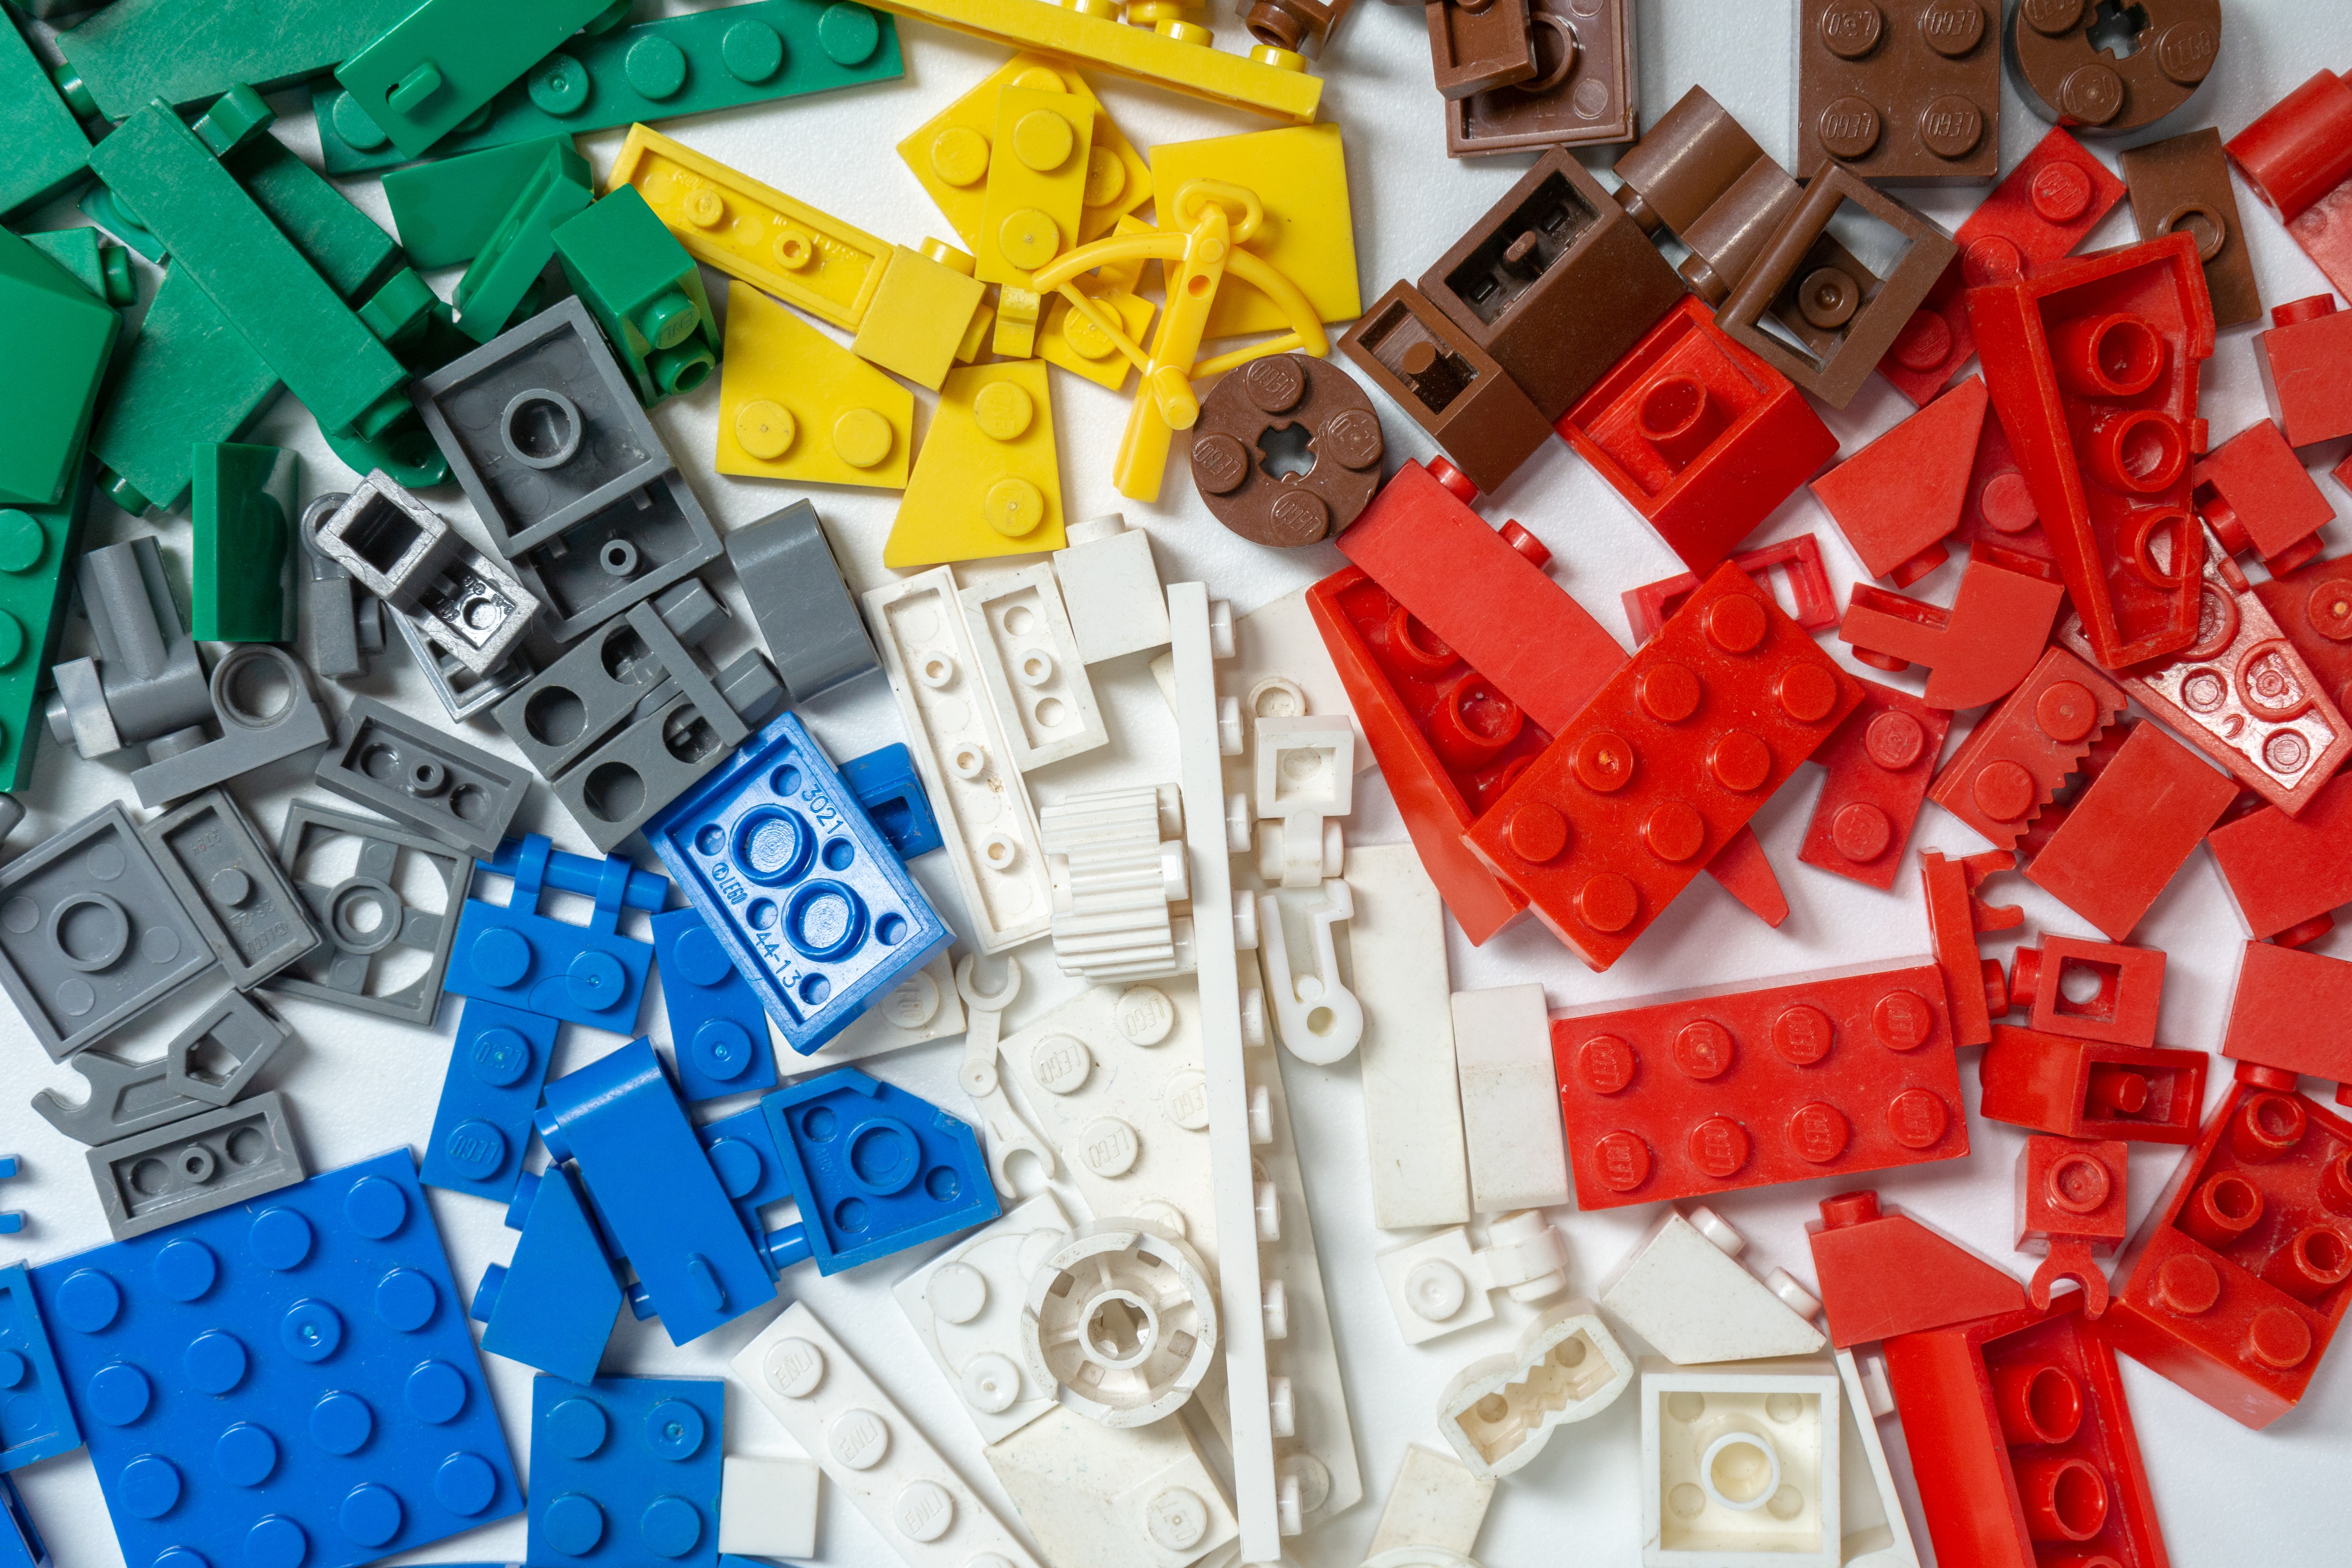 Lego block, sorted by color, on a table